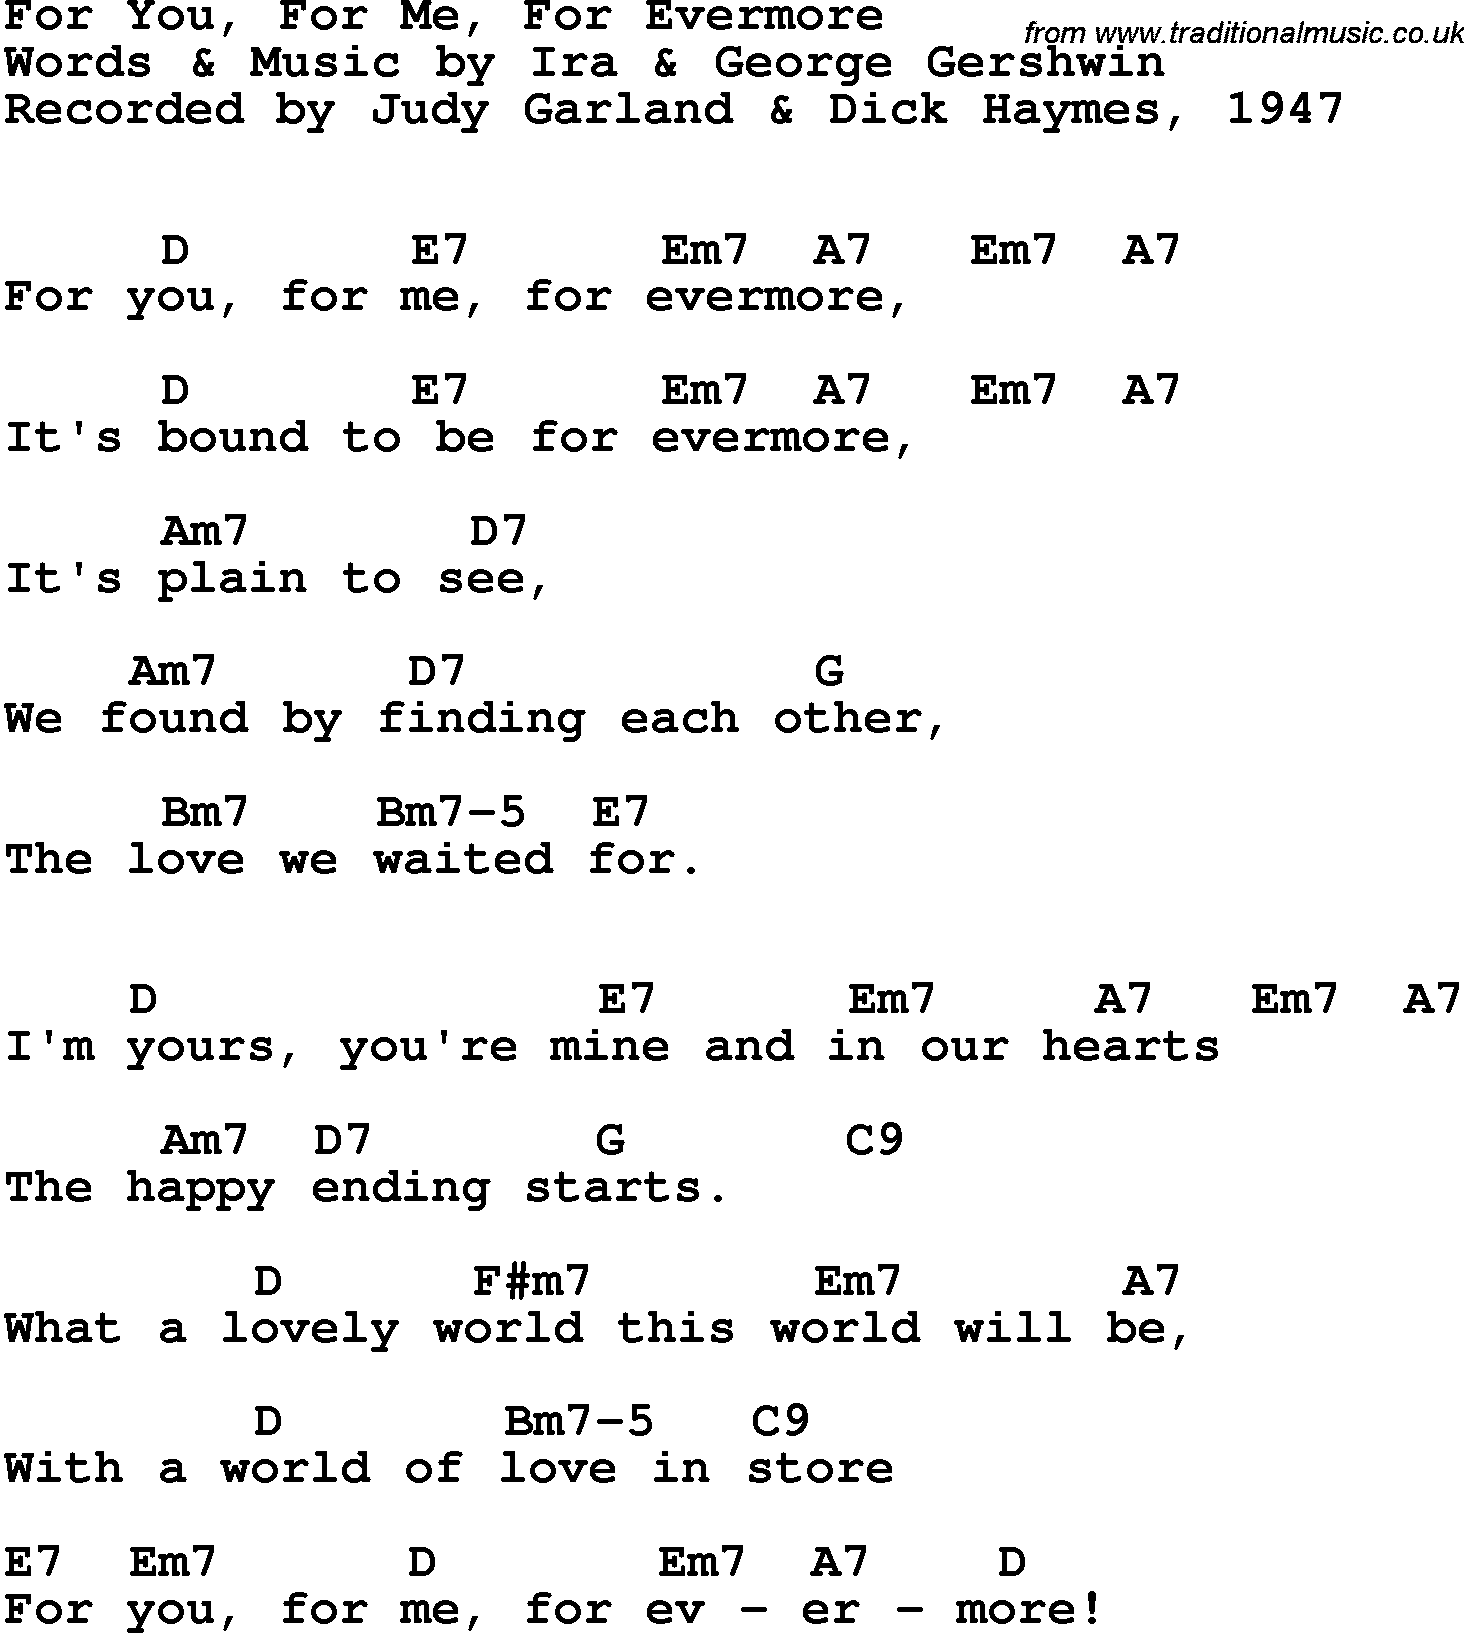 Song Lyrics with guitar chords for For You, For Me, For Evermore - Judy Garland & Dick Haymes, 1947